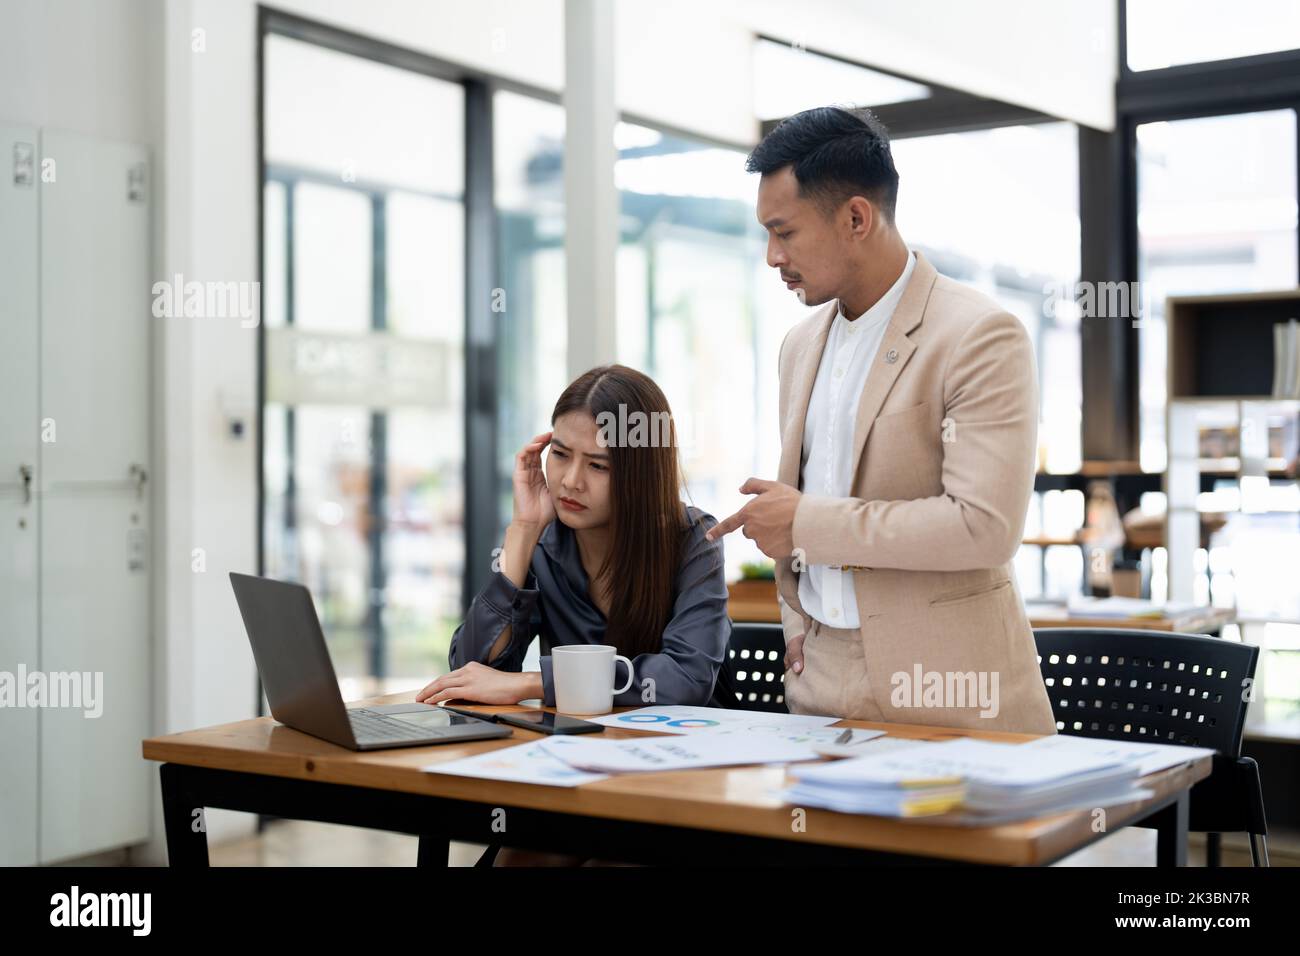 Asian team leader correcting offended employee at work. Mentor conflicts with student. Manager scolding worker for mistake or incompetence. Stock Photo